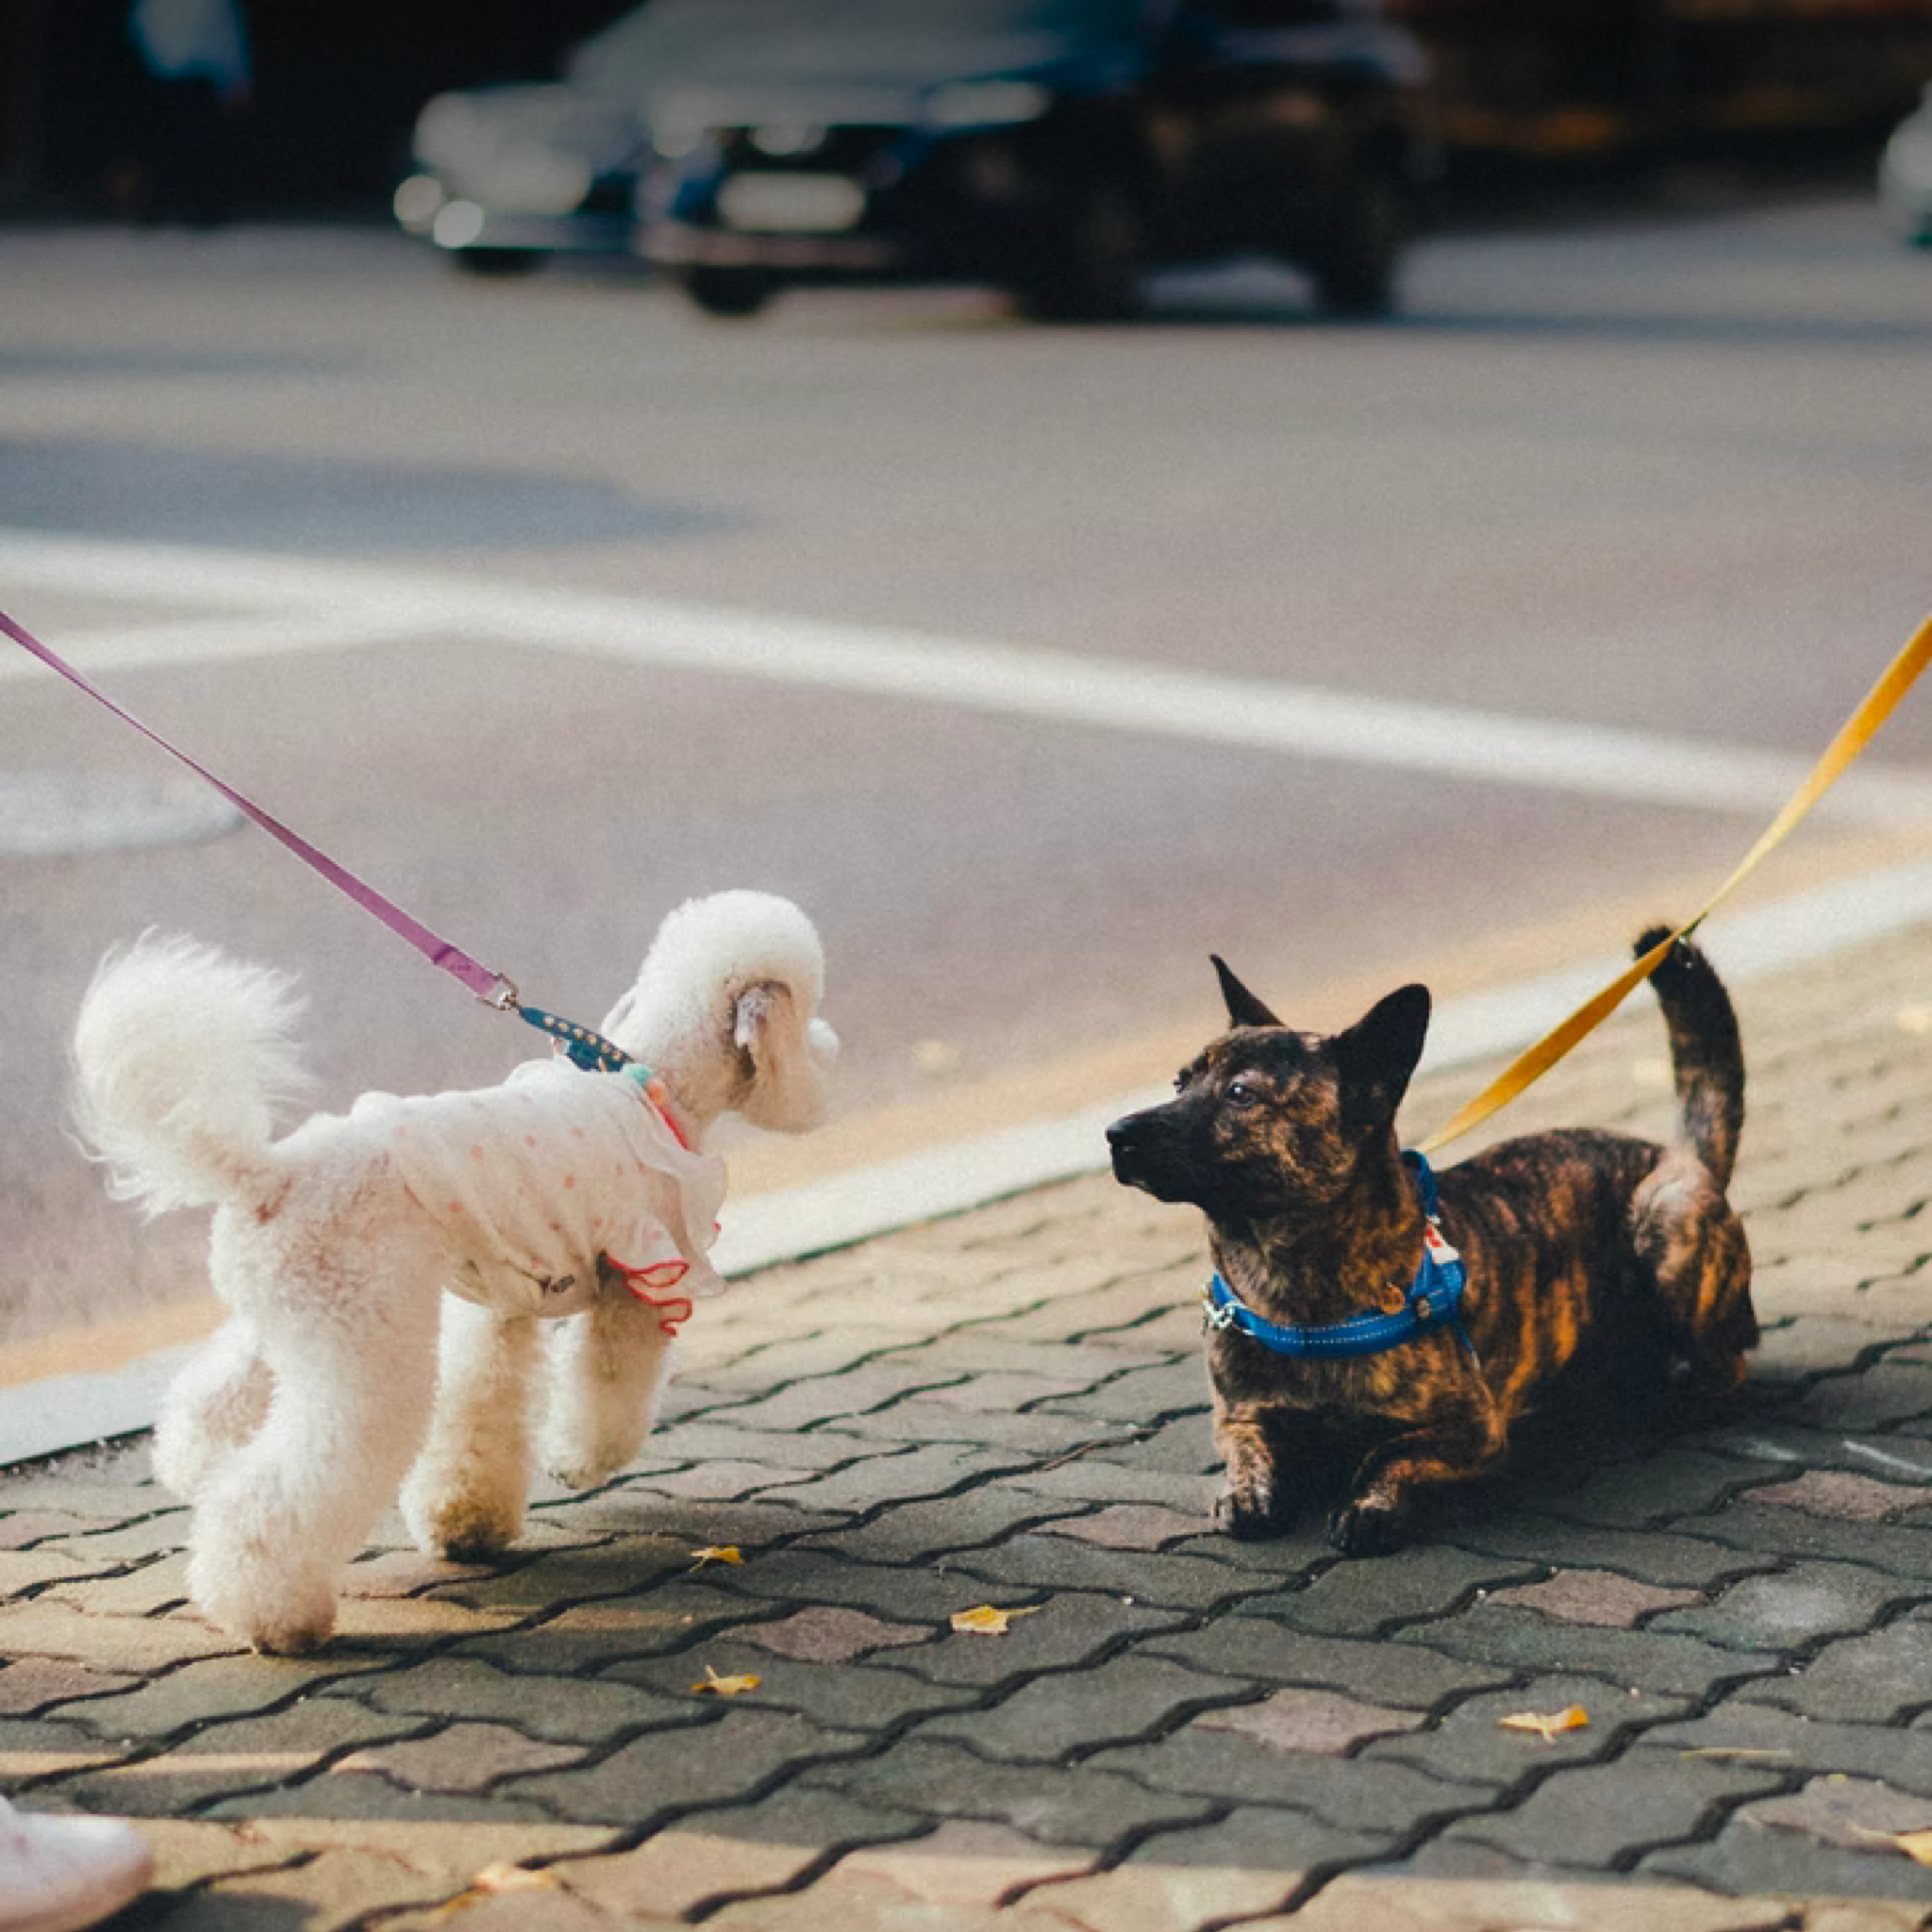 Two dogs on leashes meet up on the sidewalk next to a busy street